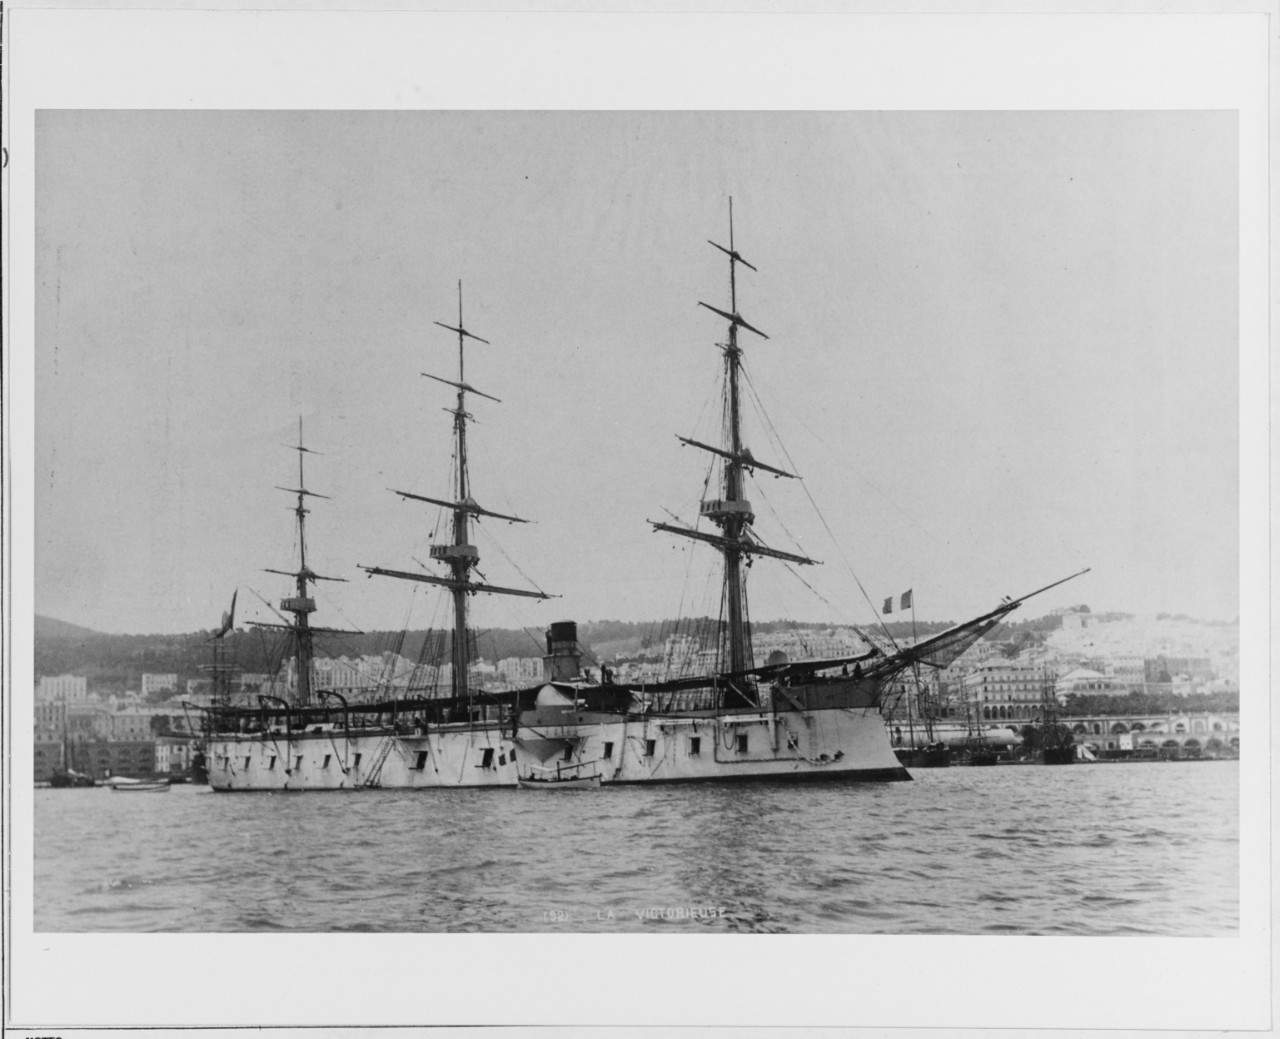 VICTORIEUSE (French armored cruiser, 1875)